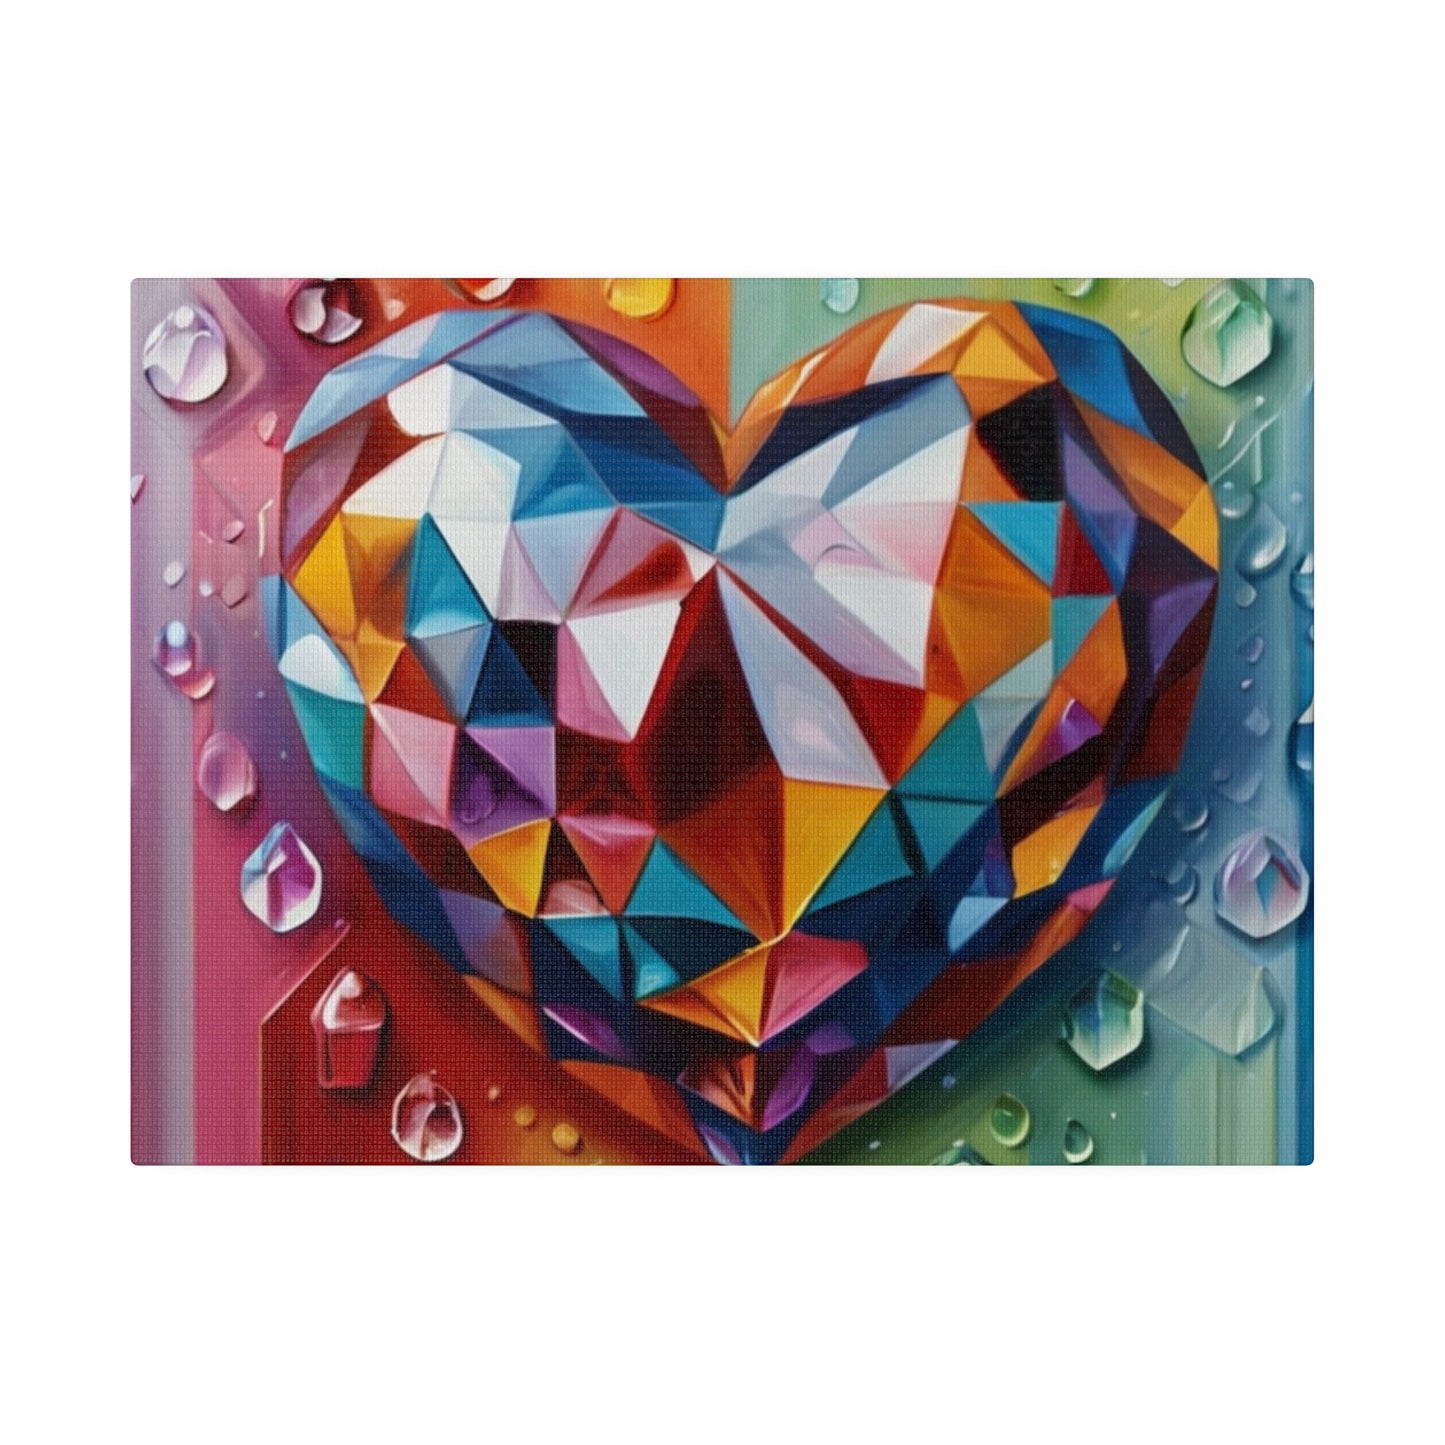 Multicoloured Crystal Love Heart - Matte Canvas, Stretched, 0.75"